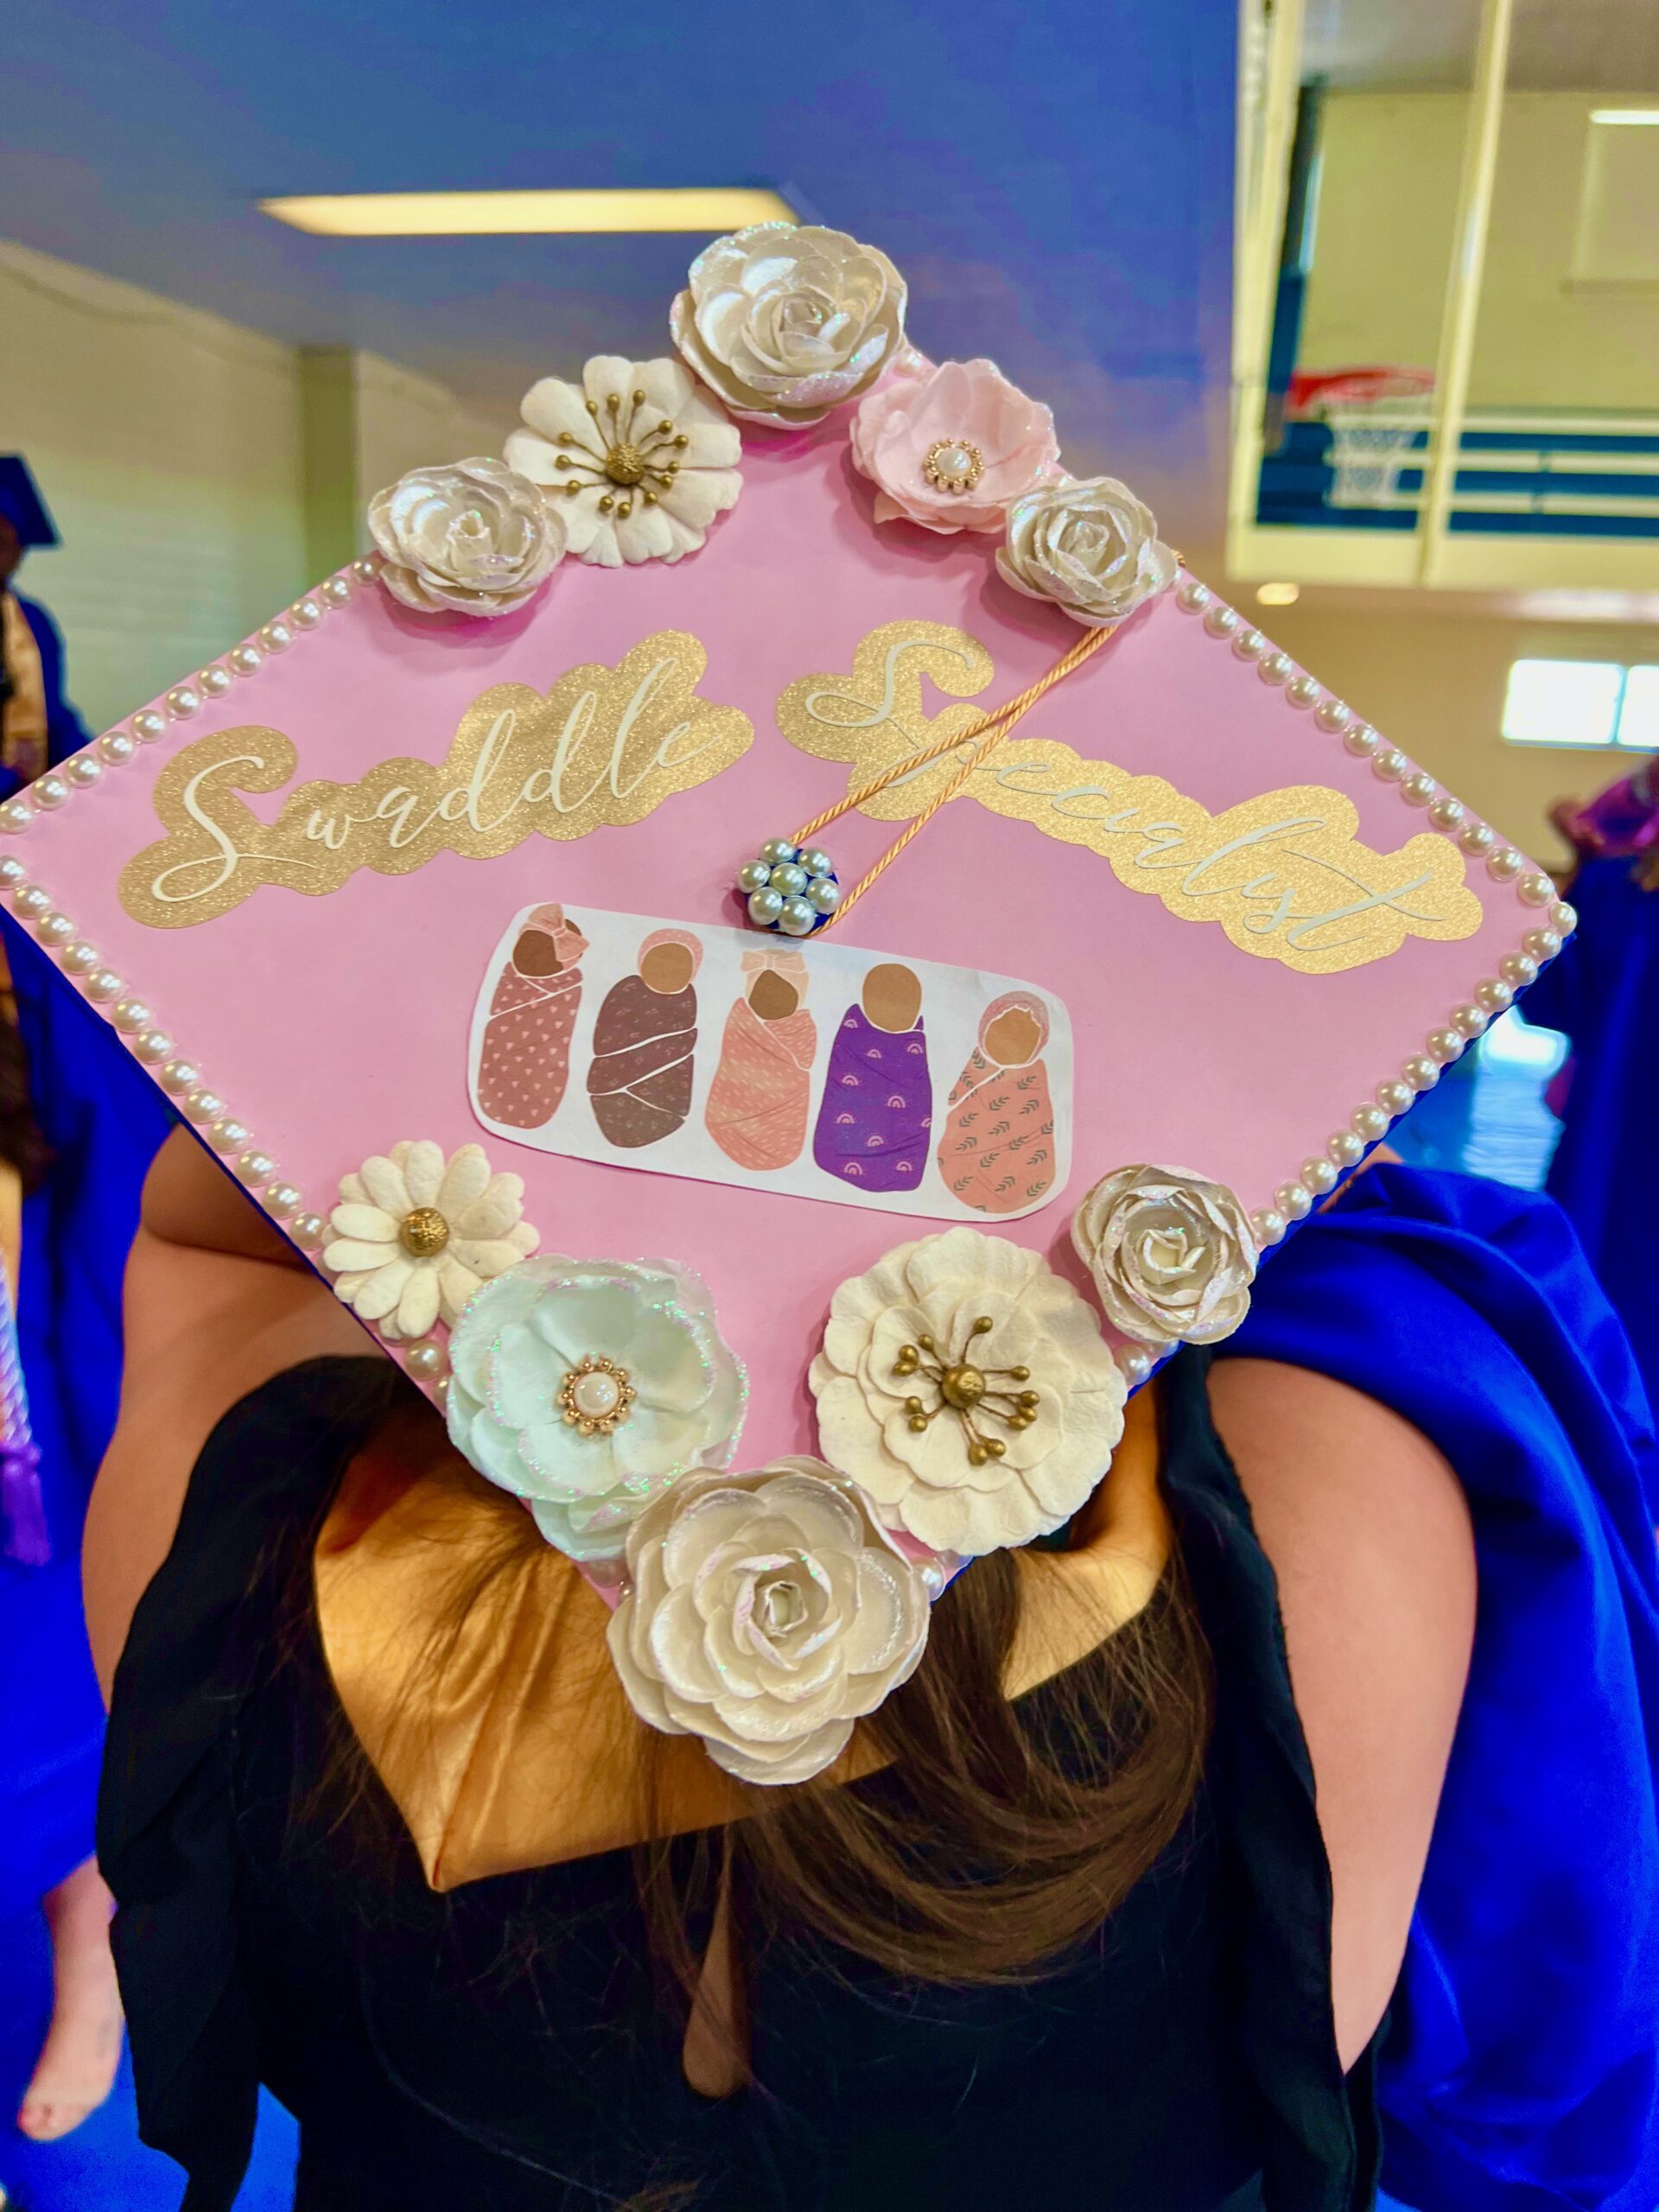 Decorated mortarboard reading "Swaddle Specialist"